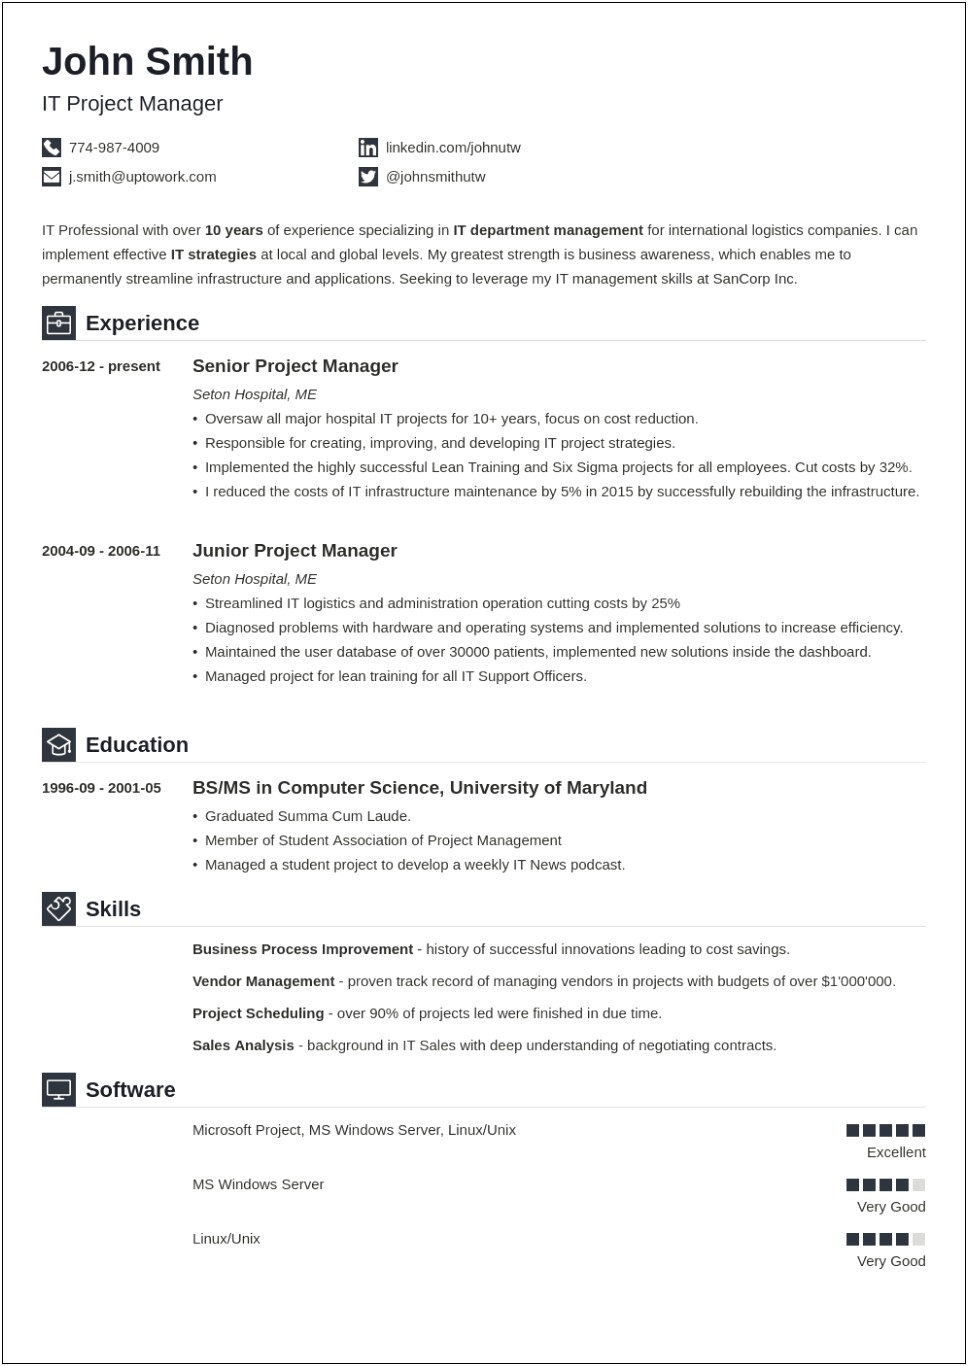 Education Or Skills On Top Of Resume